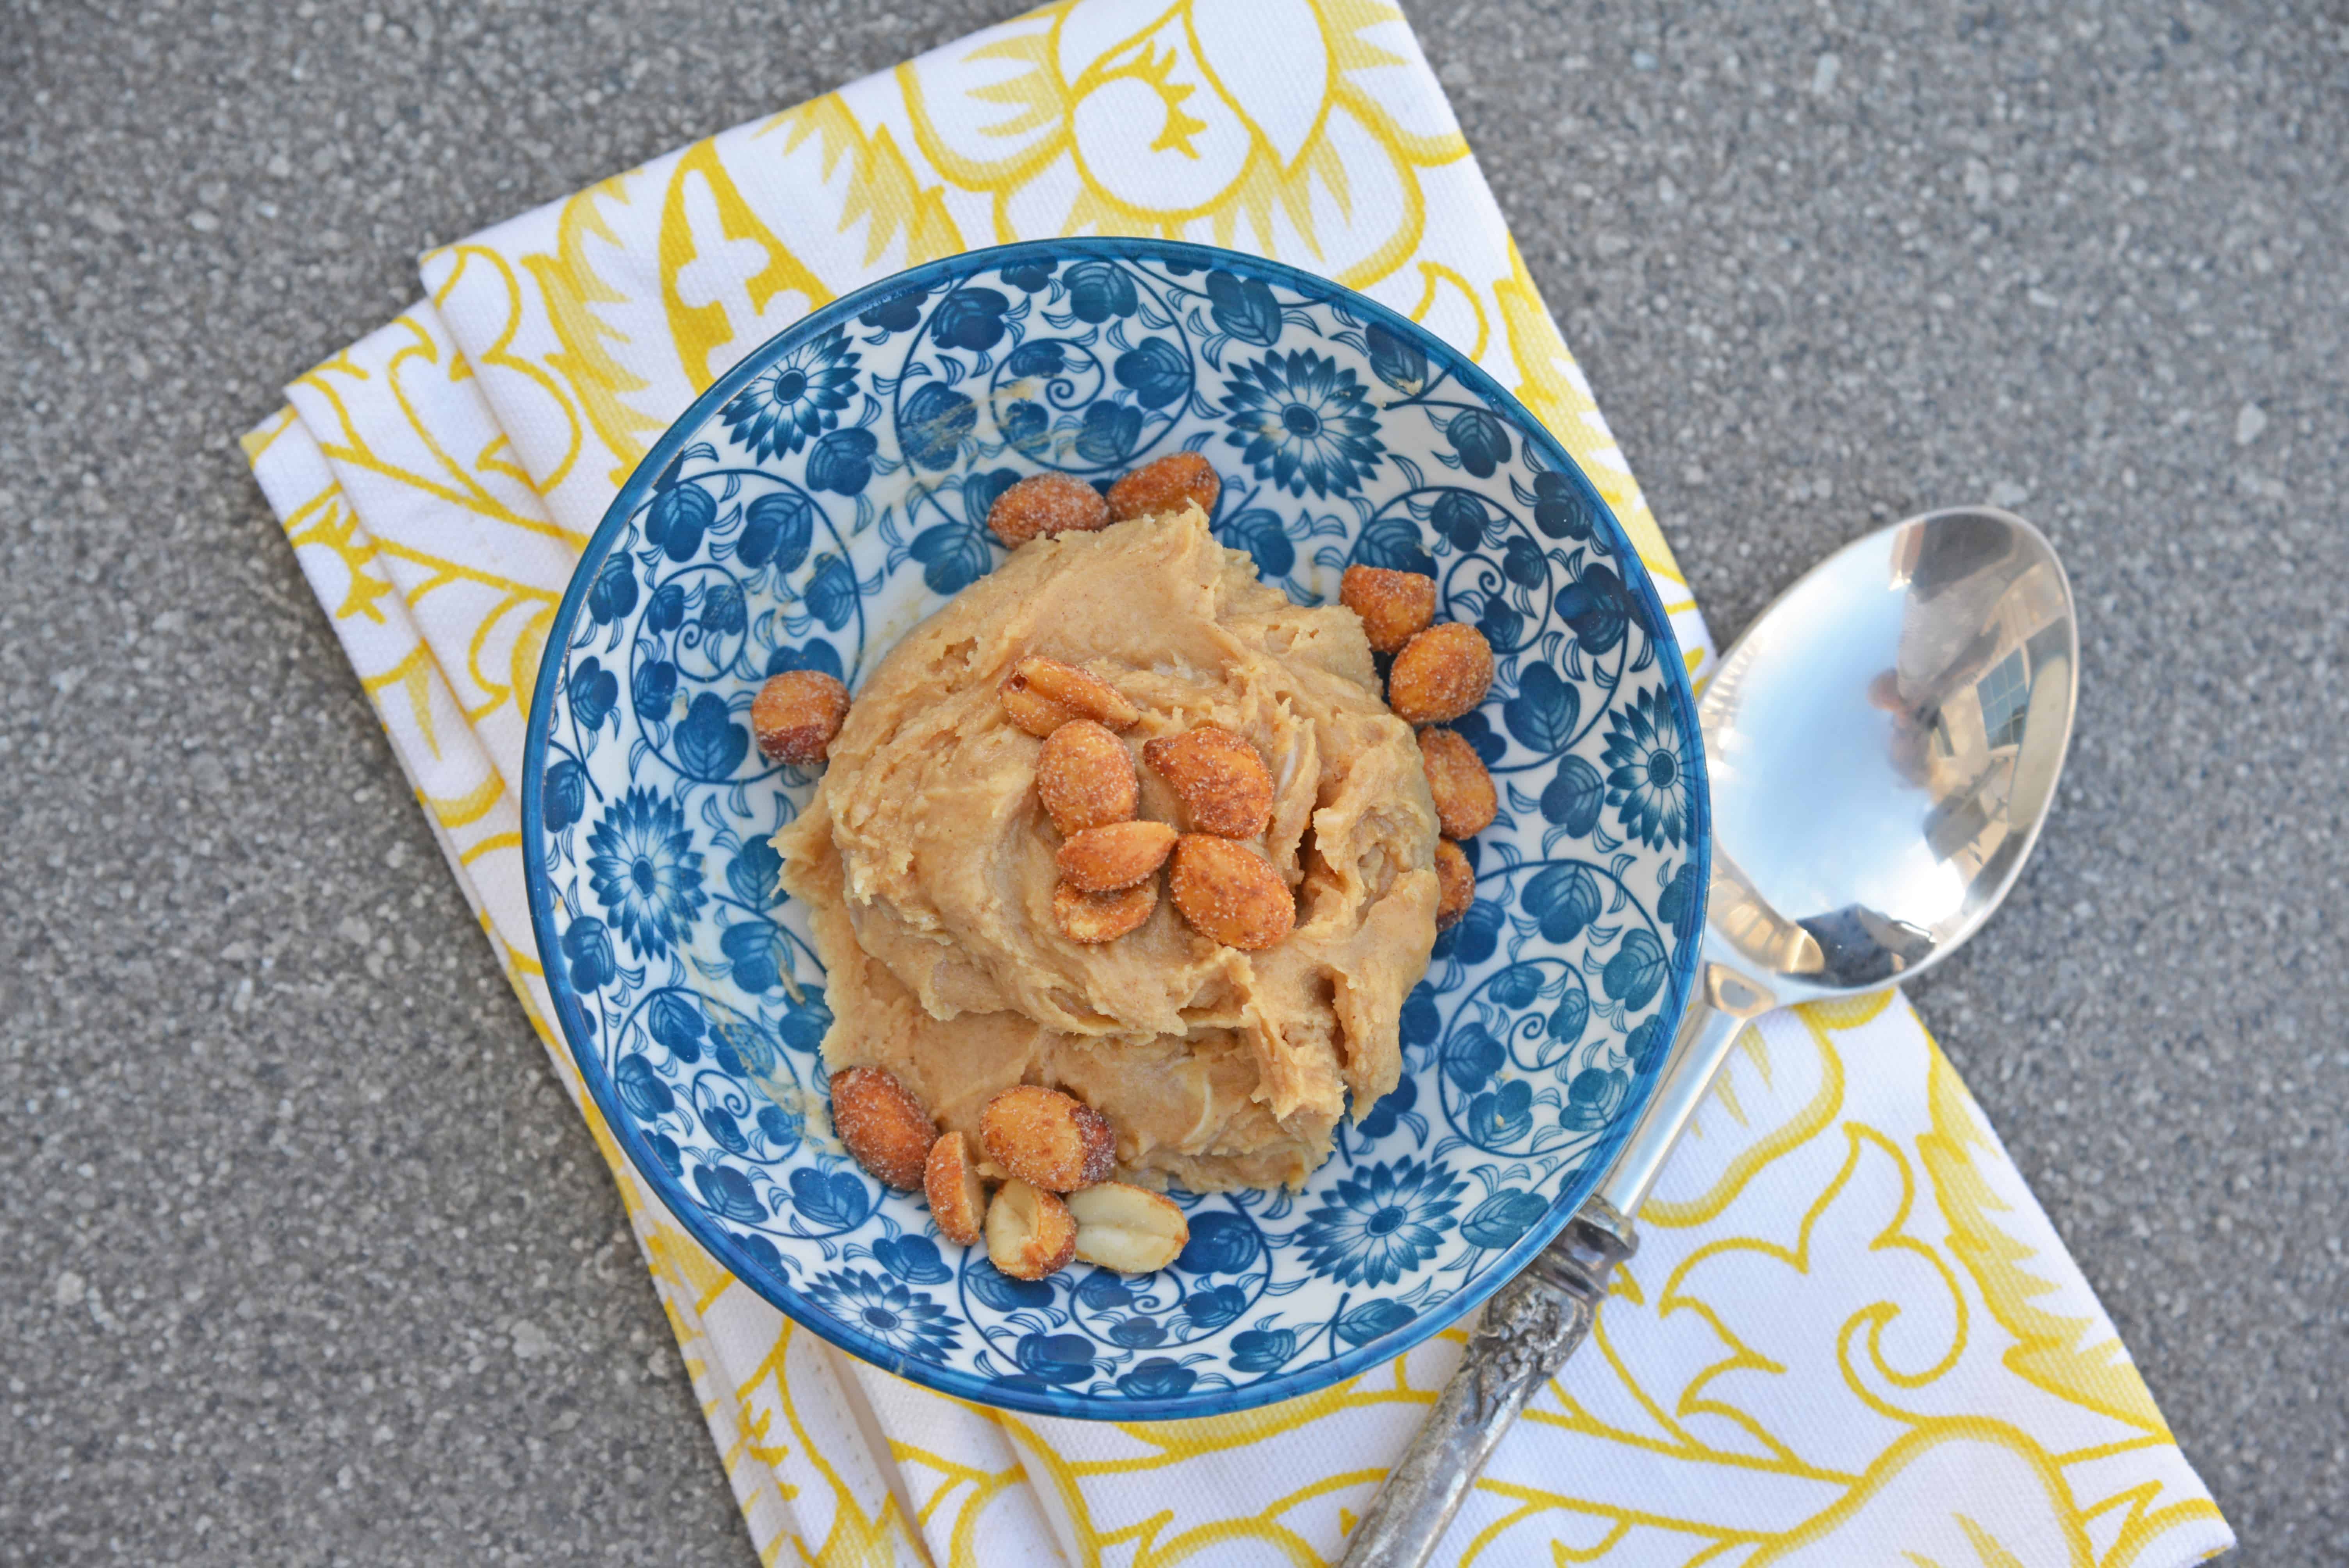 Indulge in small bowl of heaven: eggless single serve Peanut Butter Cookie Dough. You know you want some. #ediblecookiedough #singleservecookiedough #peanutbuttercookiedough www.savoryexperiments.com